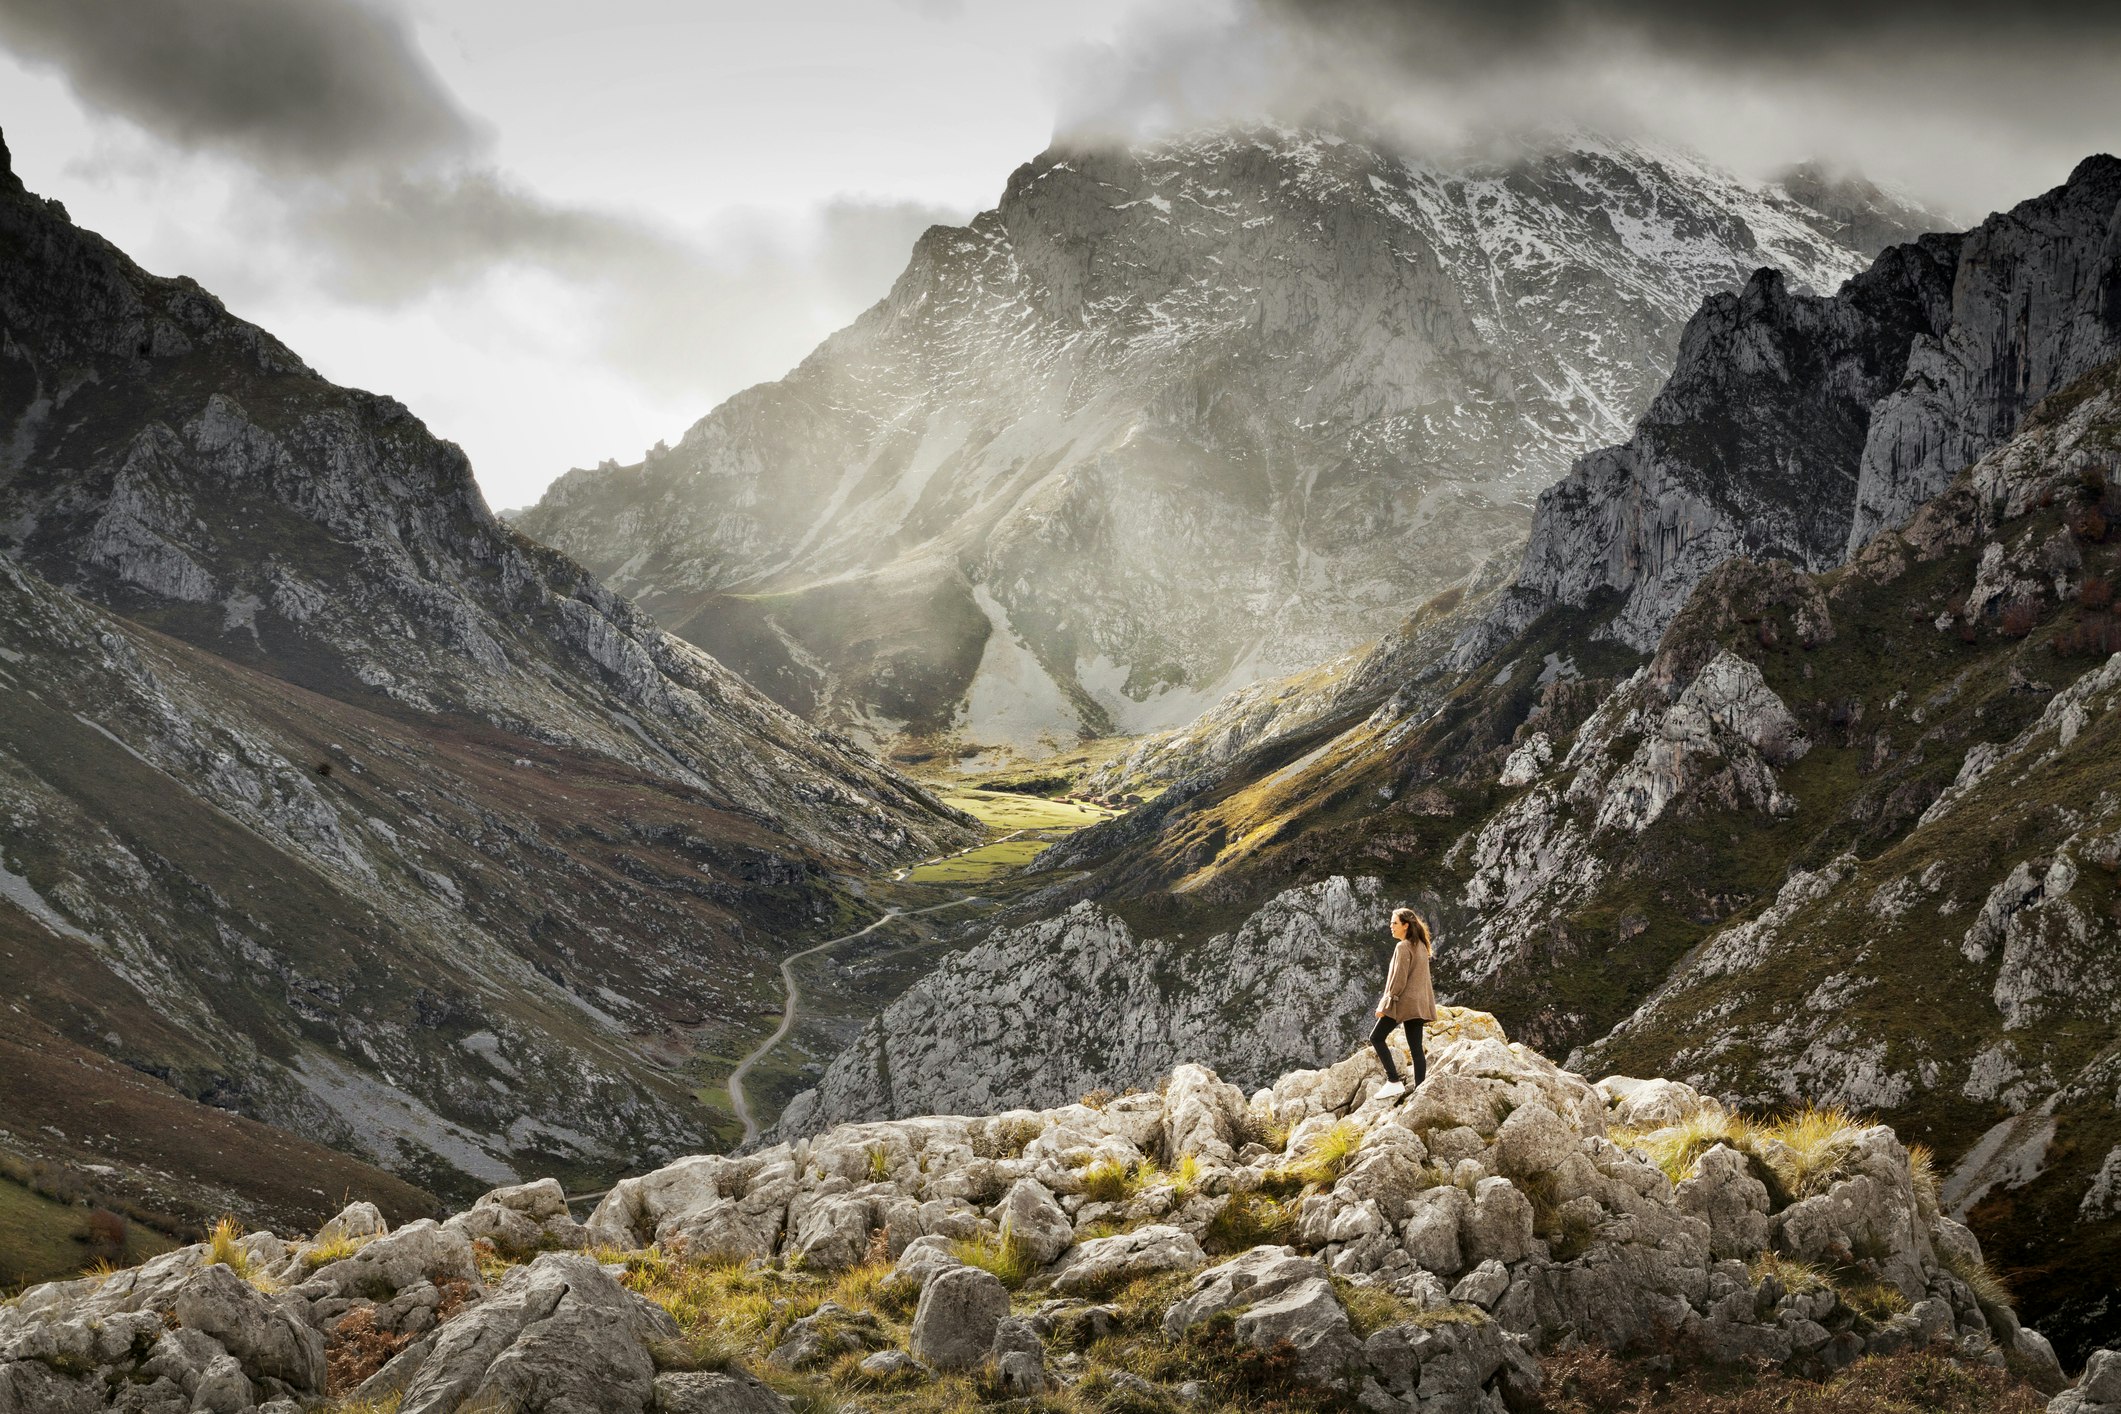 Hiker in the mountains of Picos de Europa, Spain